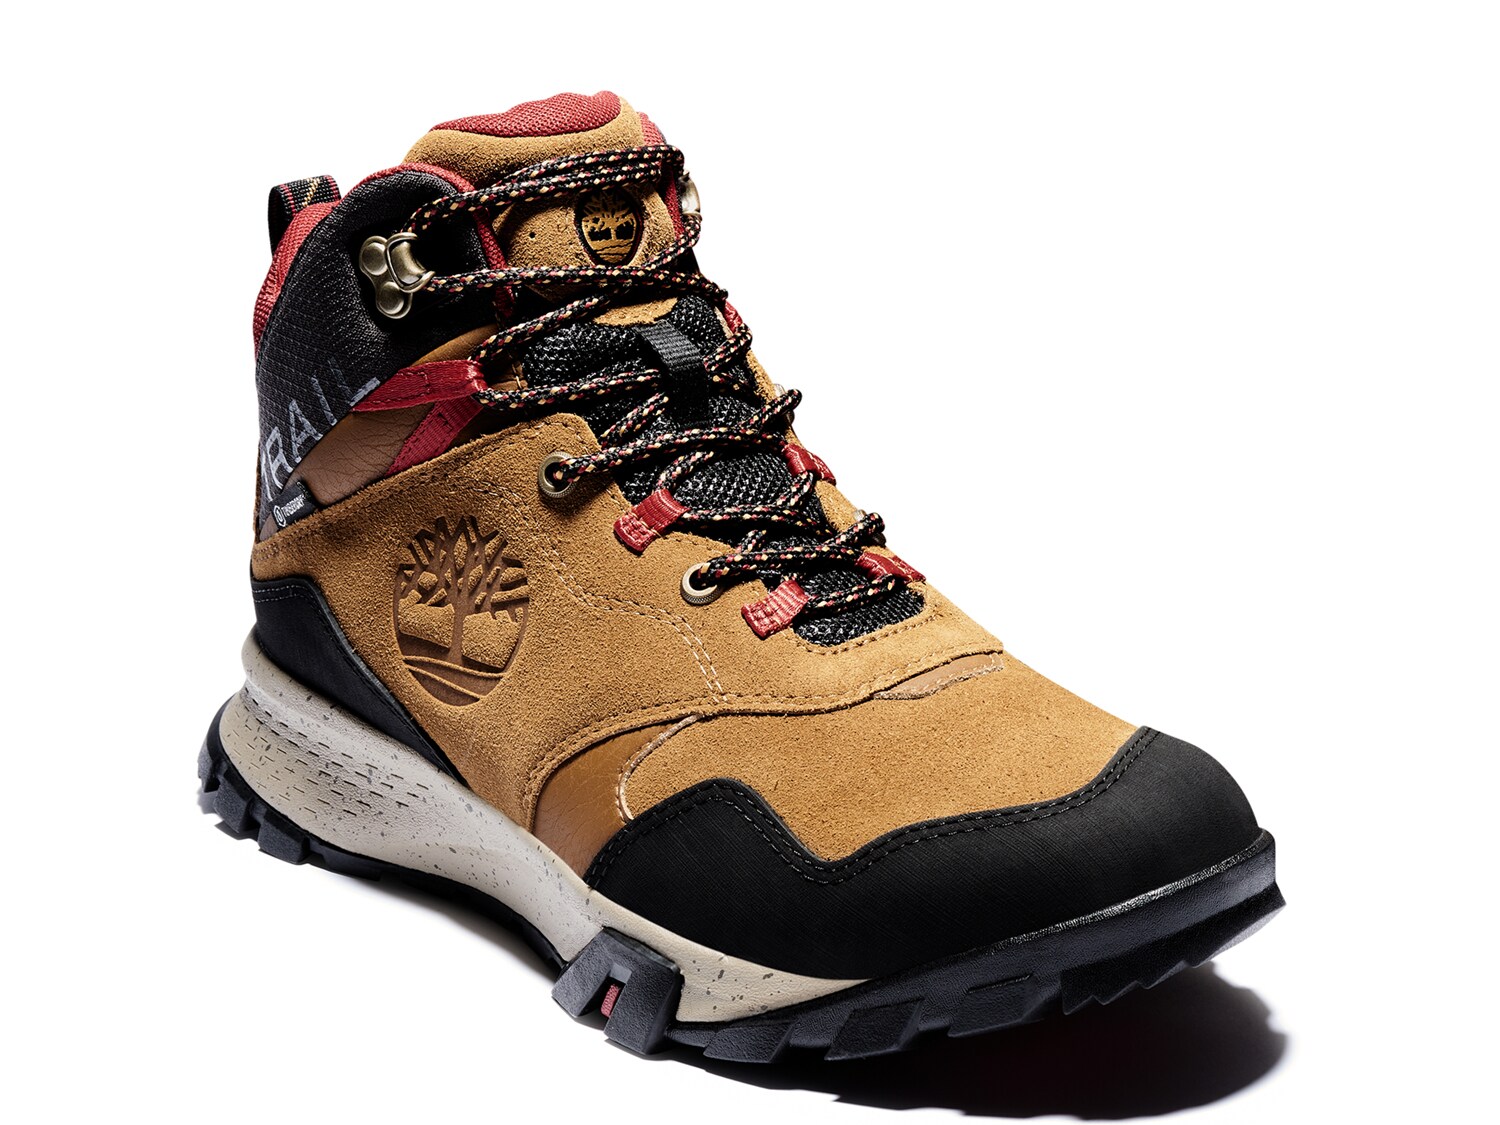 mens timberland boots dsw